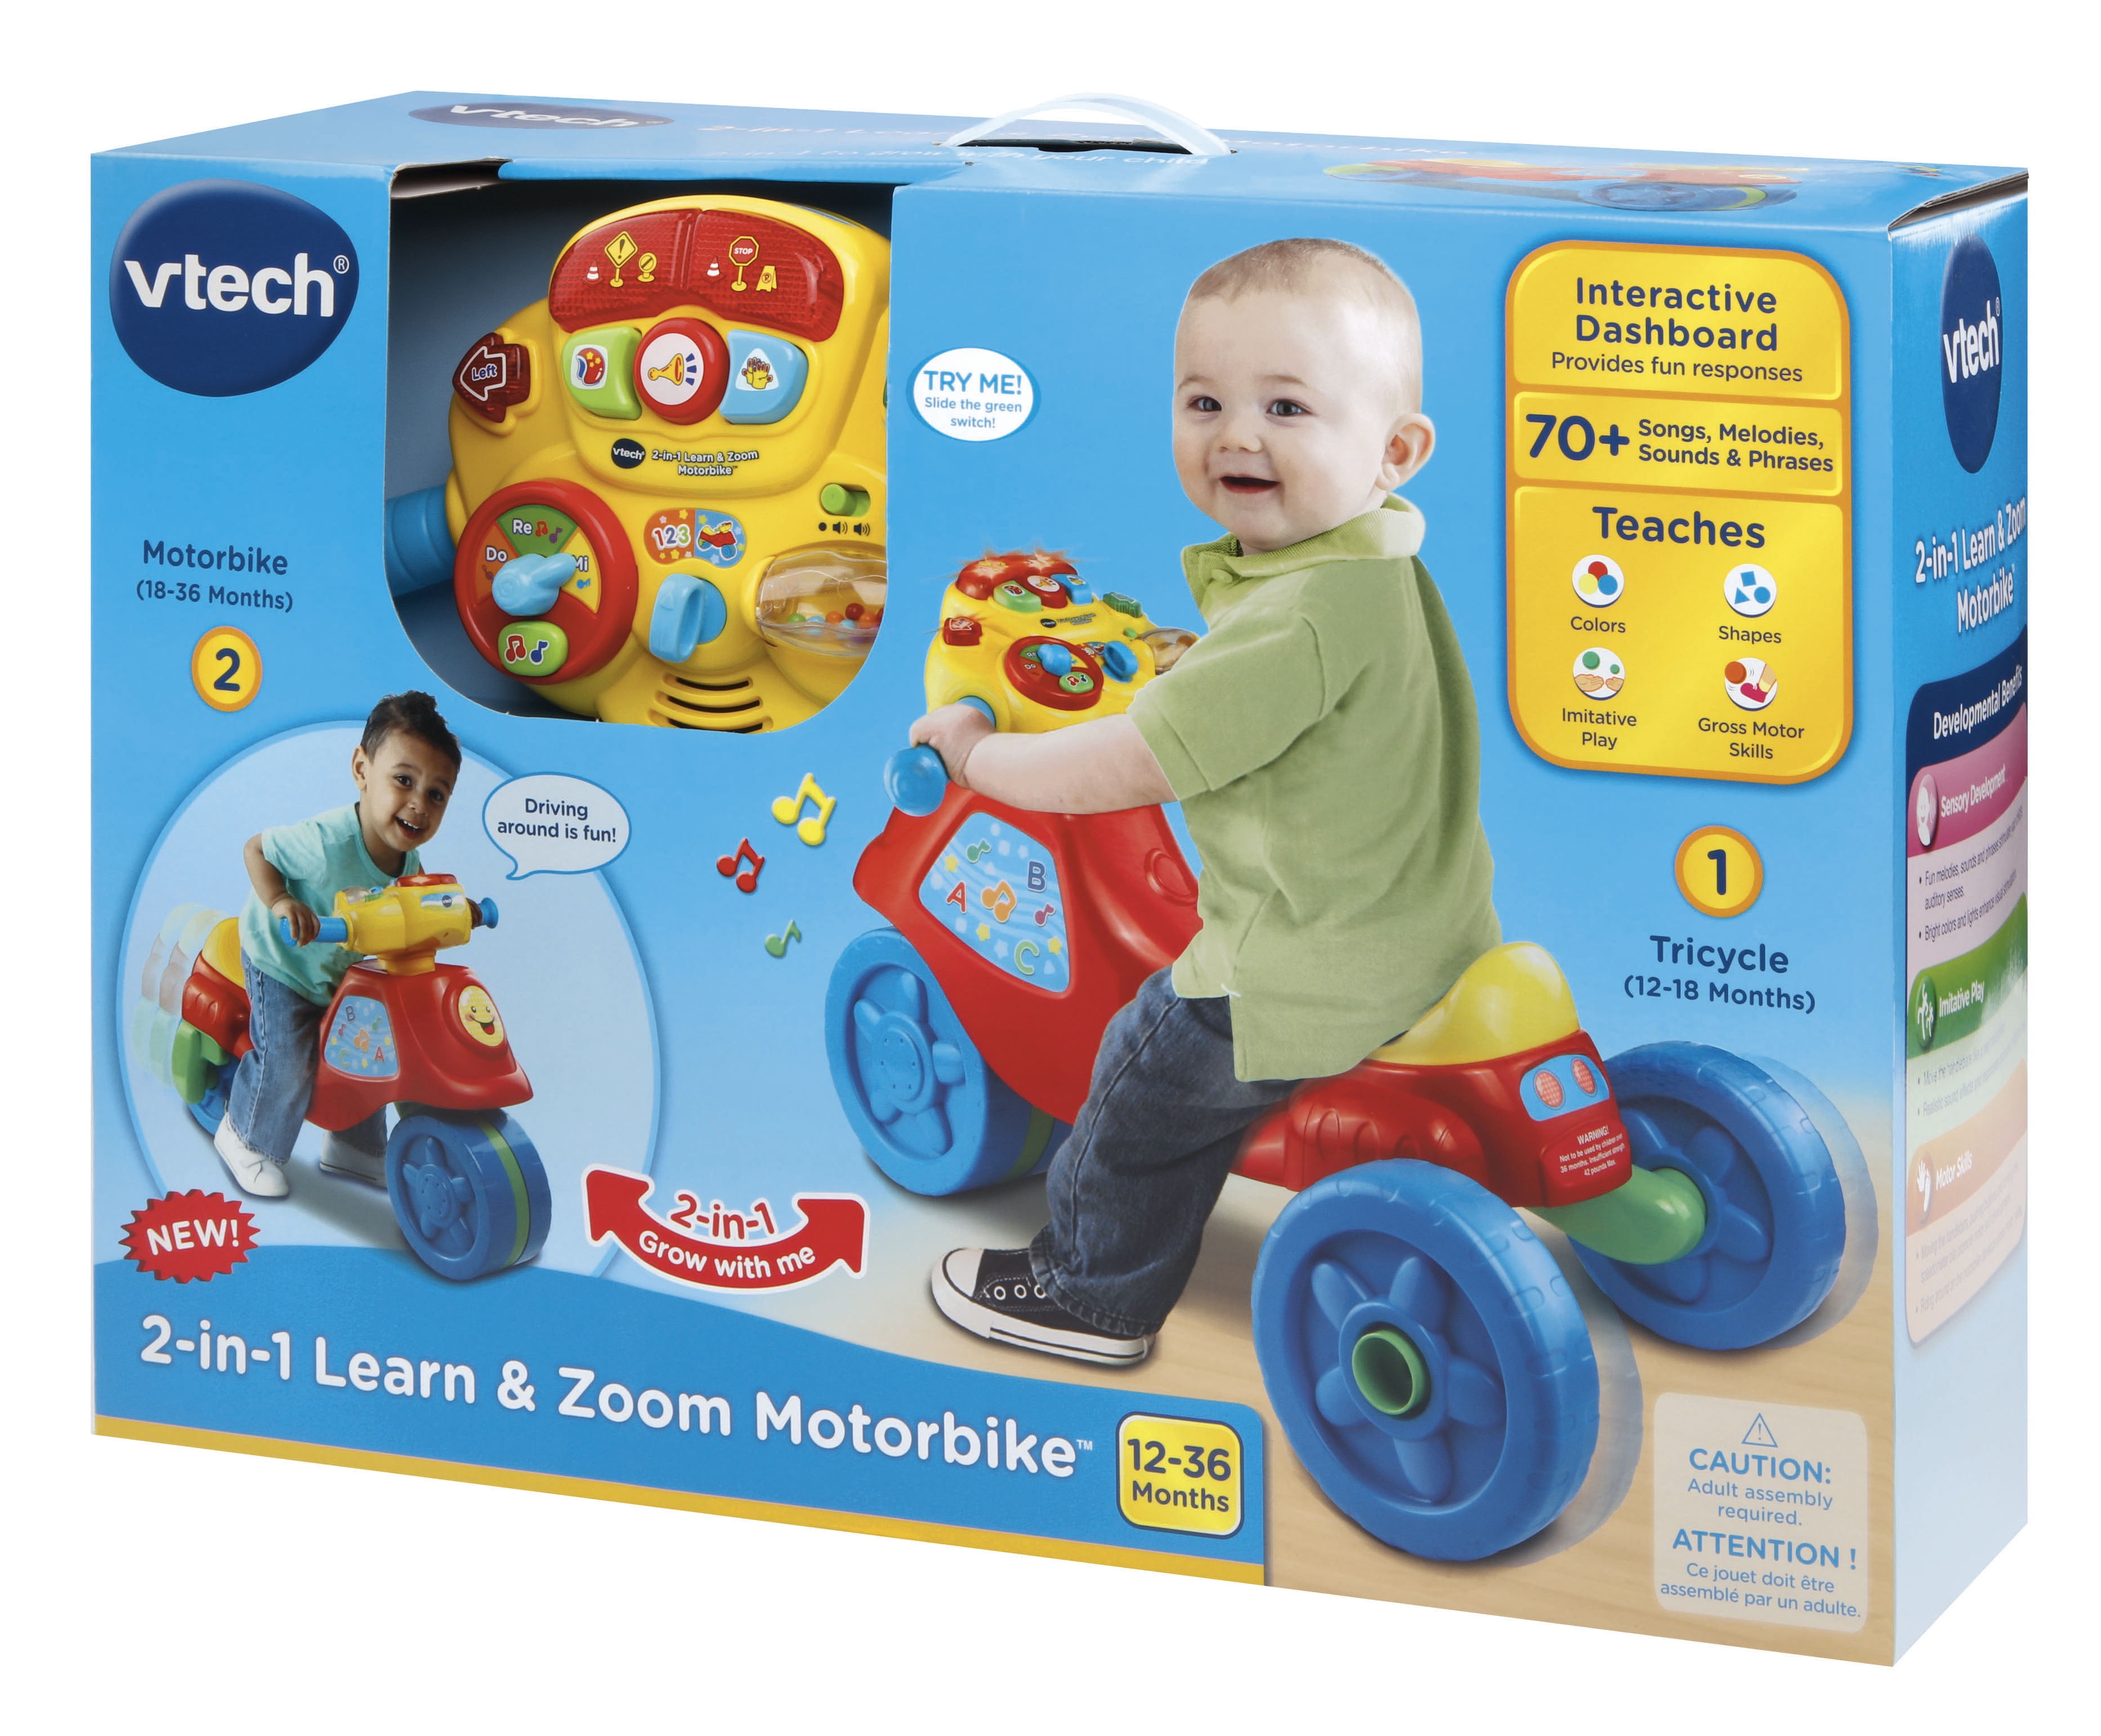 vtech 2 in 1 learn and zoom motorbike target